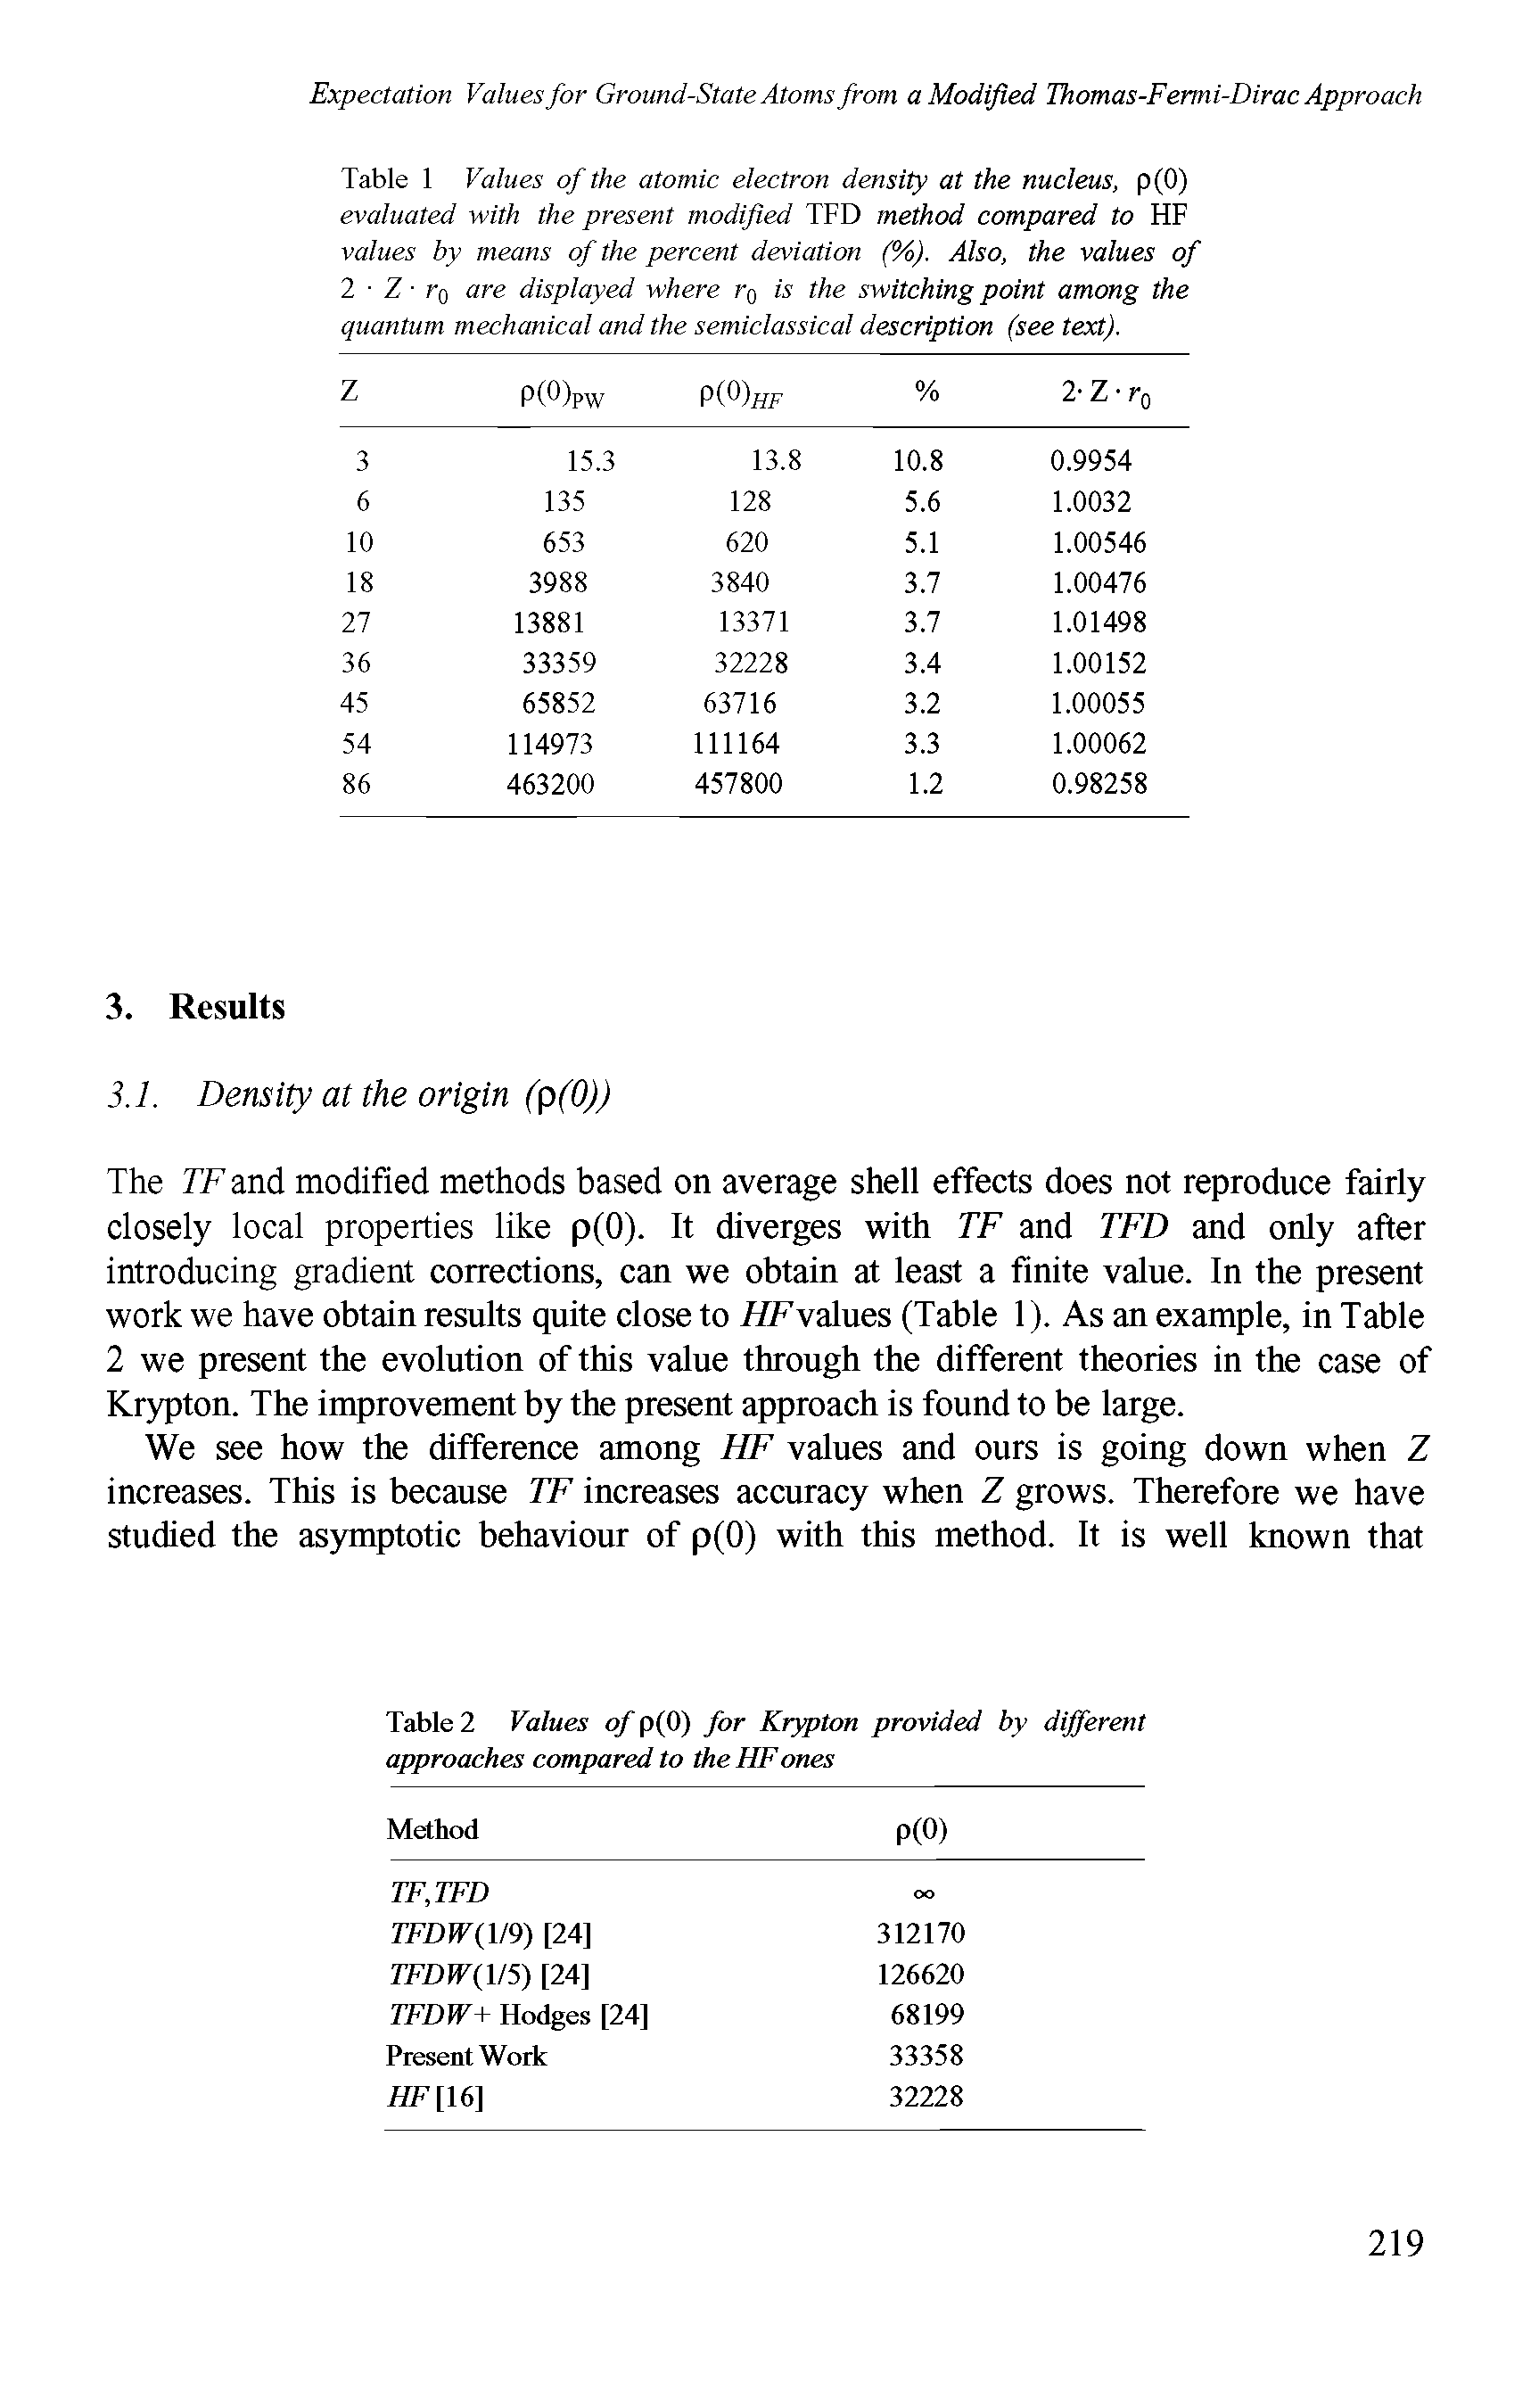 Table 1 Values of the atomic electron density at the nucleus, p(0) evaluated with the present modified TFD method compared to HF values by means of the percent deviation (%). Also, the values of 2 Z tq are displayed where tq is the switching point among the quantum mechanical and the semiclassical description (see text).